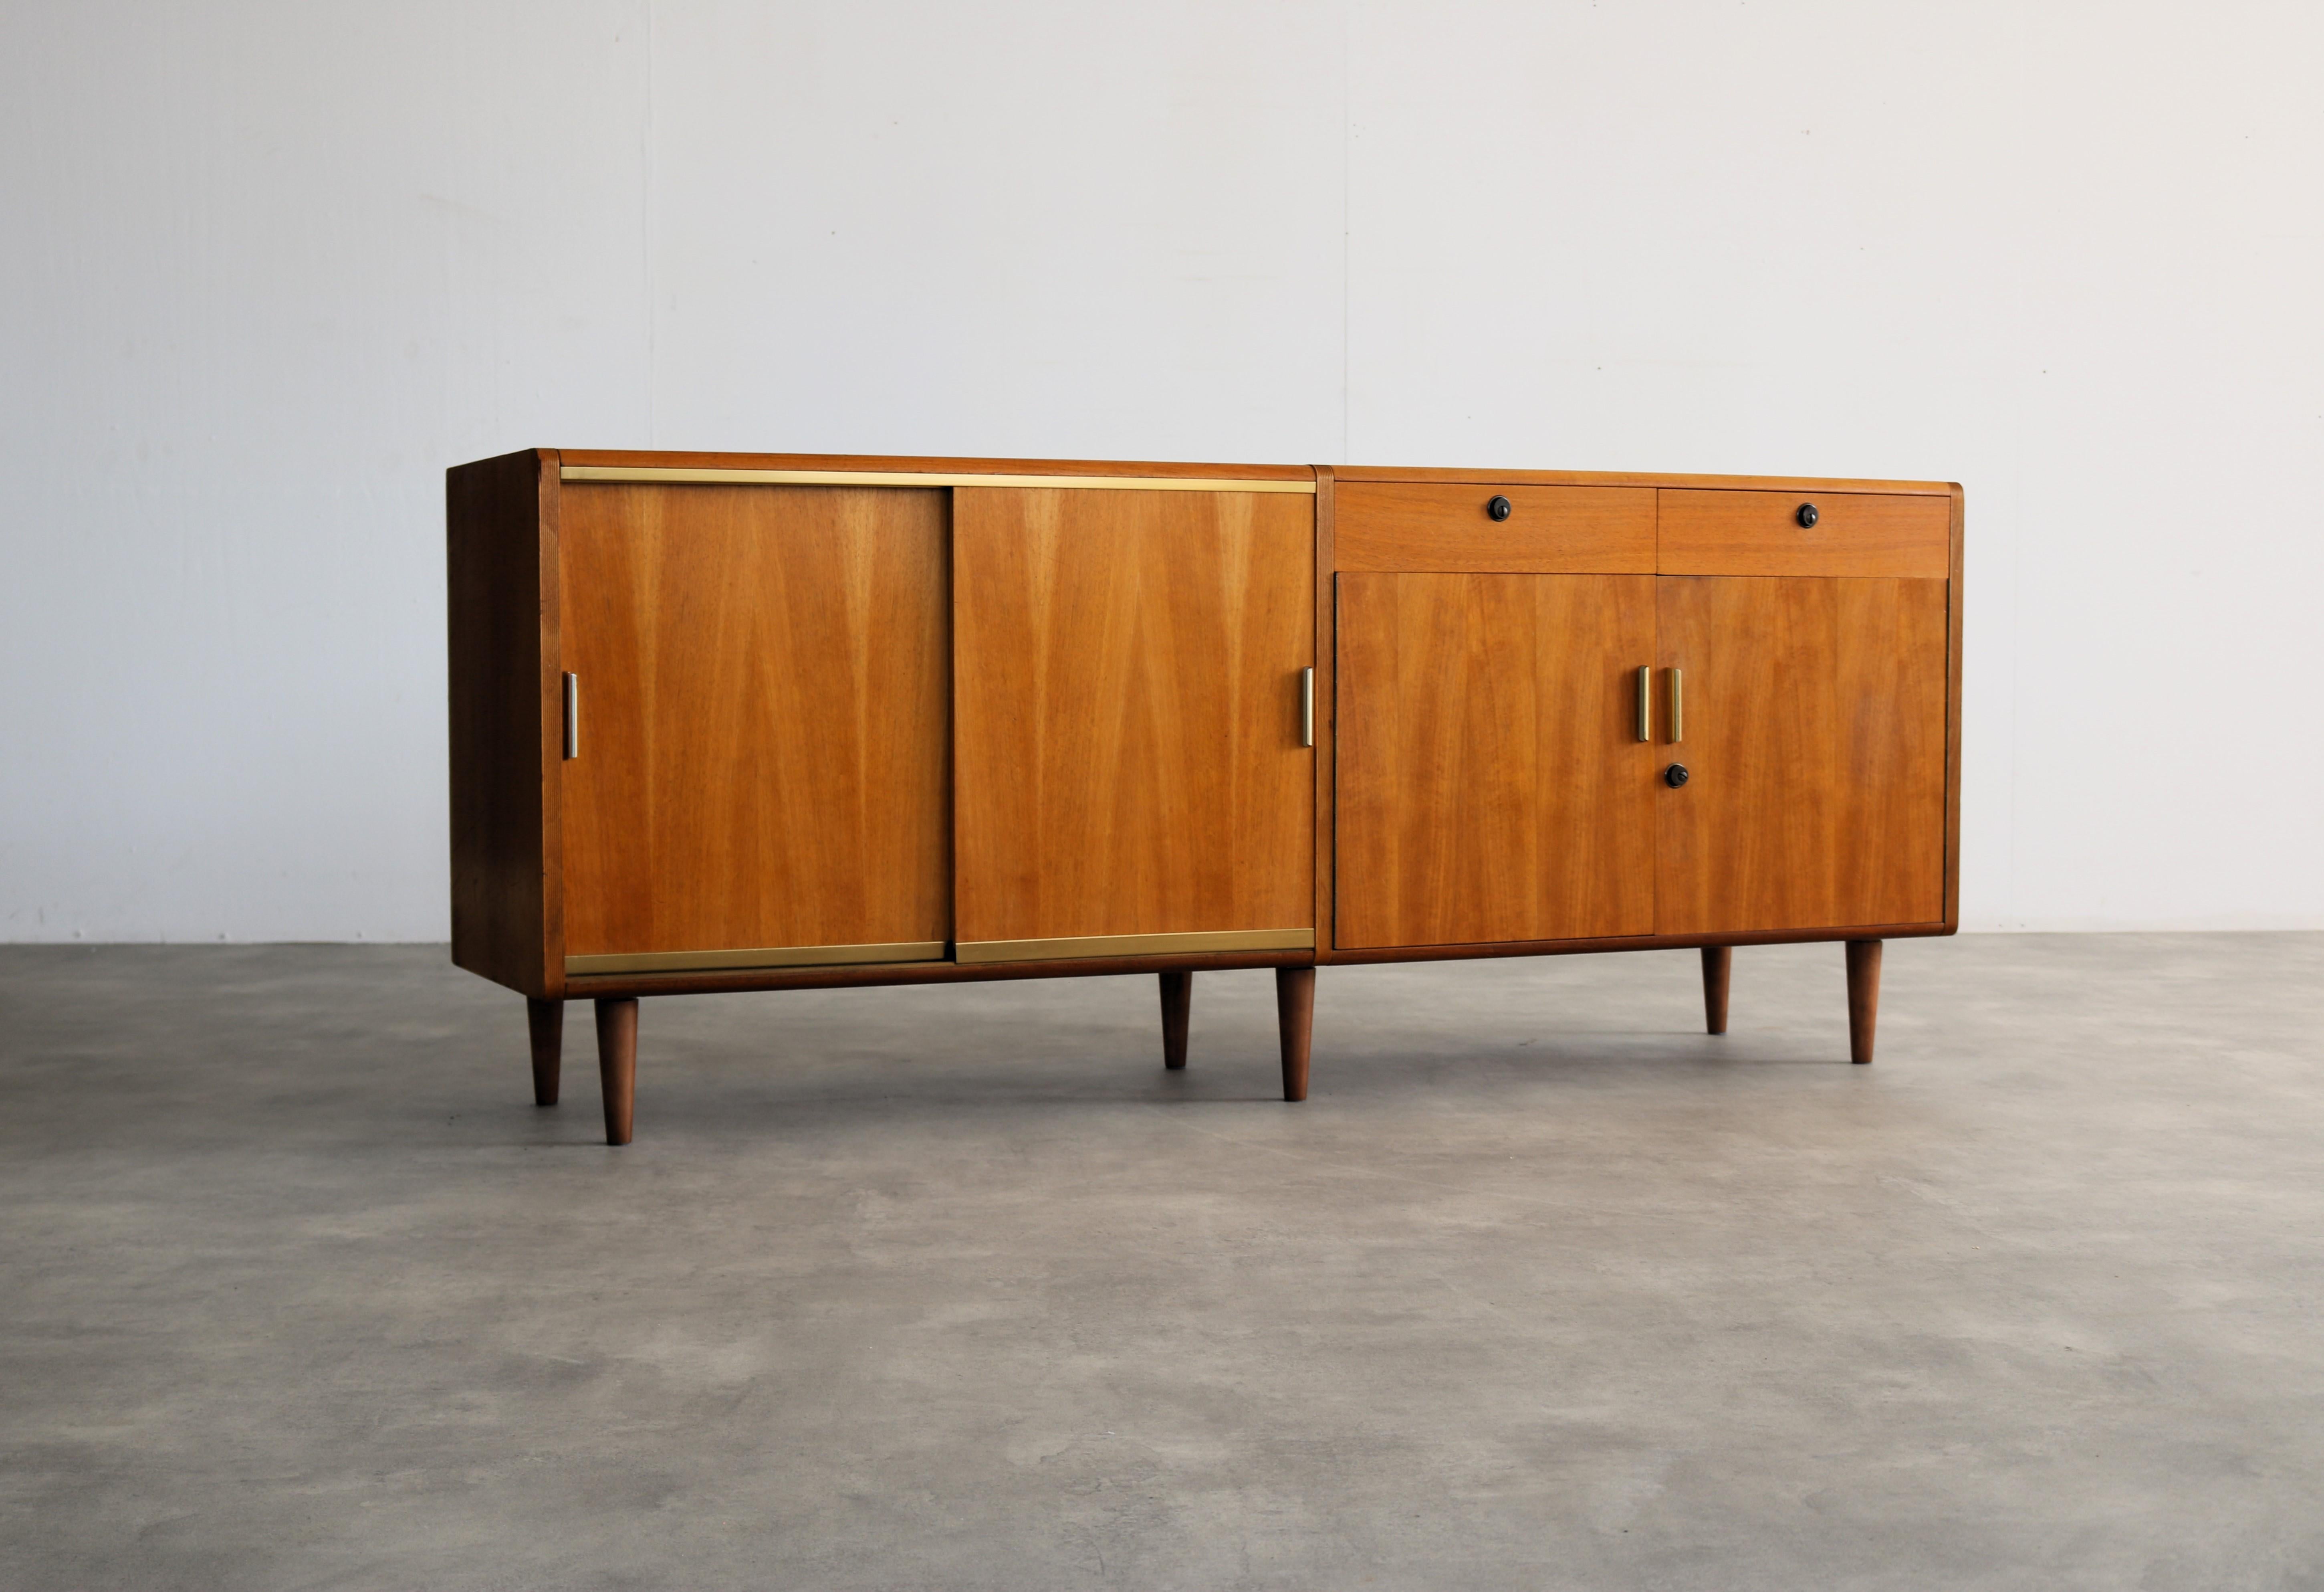 
vintage sideboard  sideboard  60s  Patin

period  60's
design  A.A. Patin  The Netherlands
condition  good  light signs of use  key missing; door lock defective due to broken key;

size  72 x 176.5 x 44 (hxwxd)

details  teak; brass; legs are not